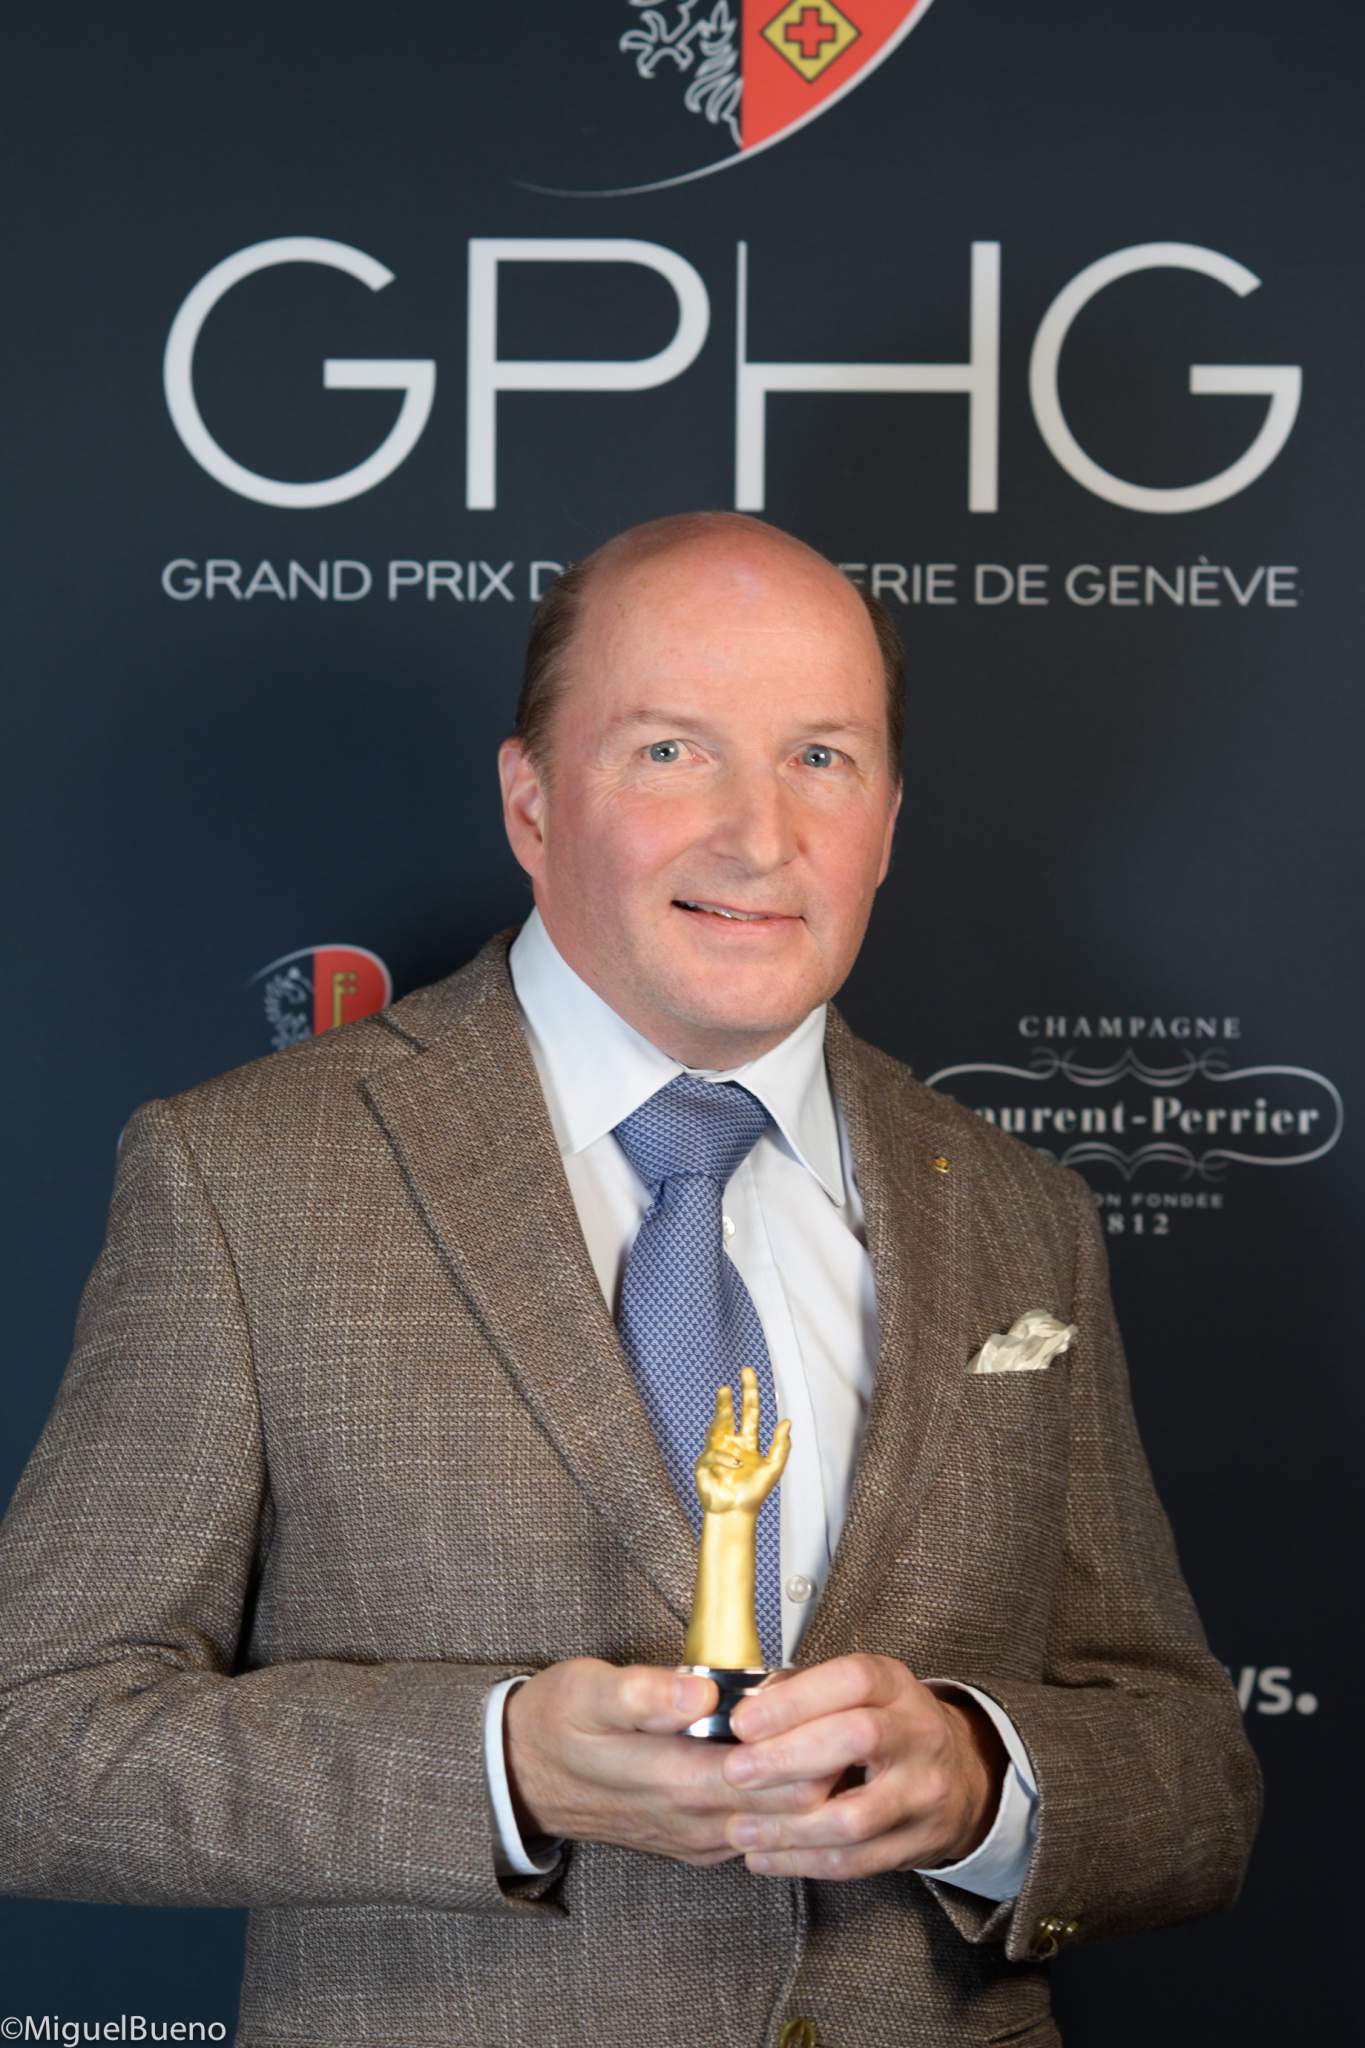 Owner and watchmaker, winner of the Men’s Watch Prize 2019